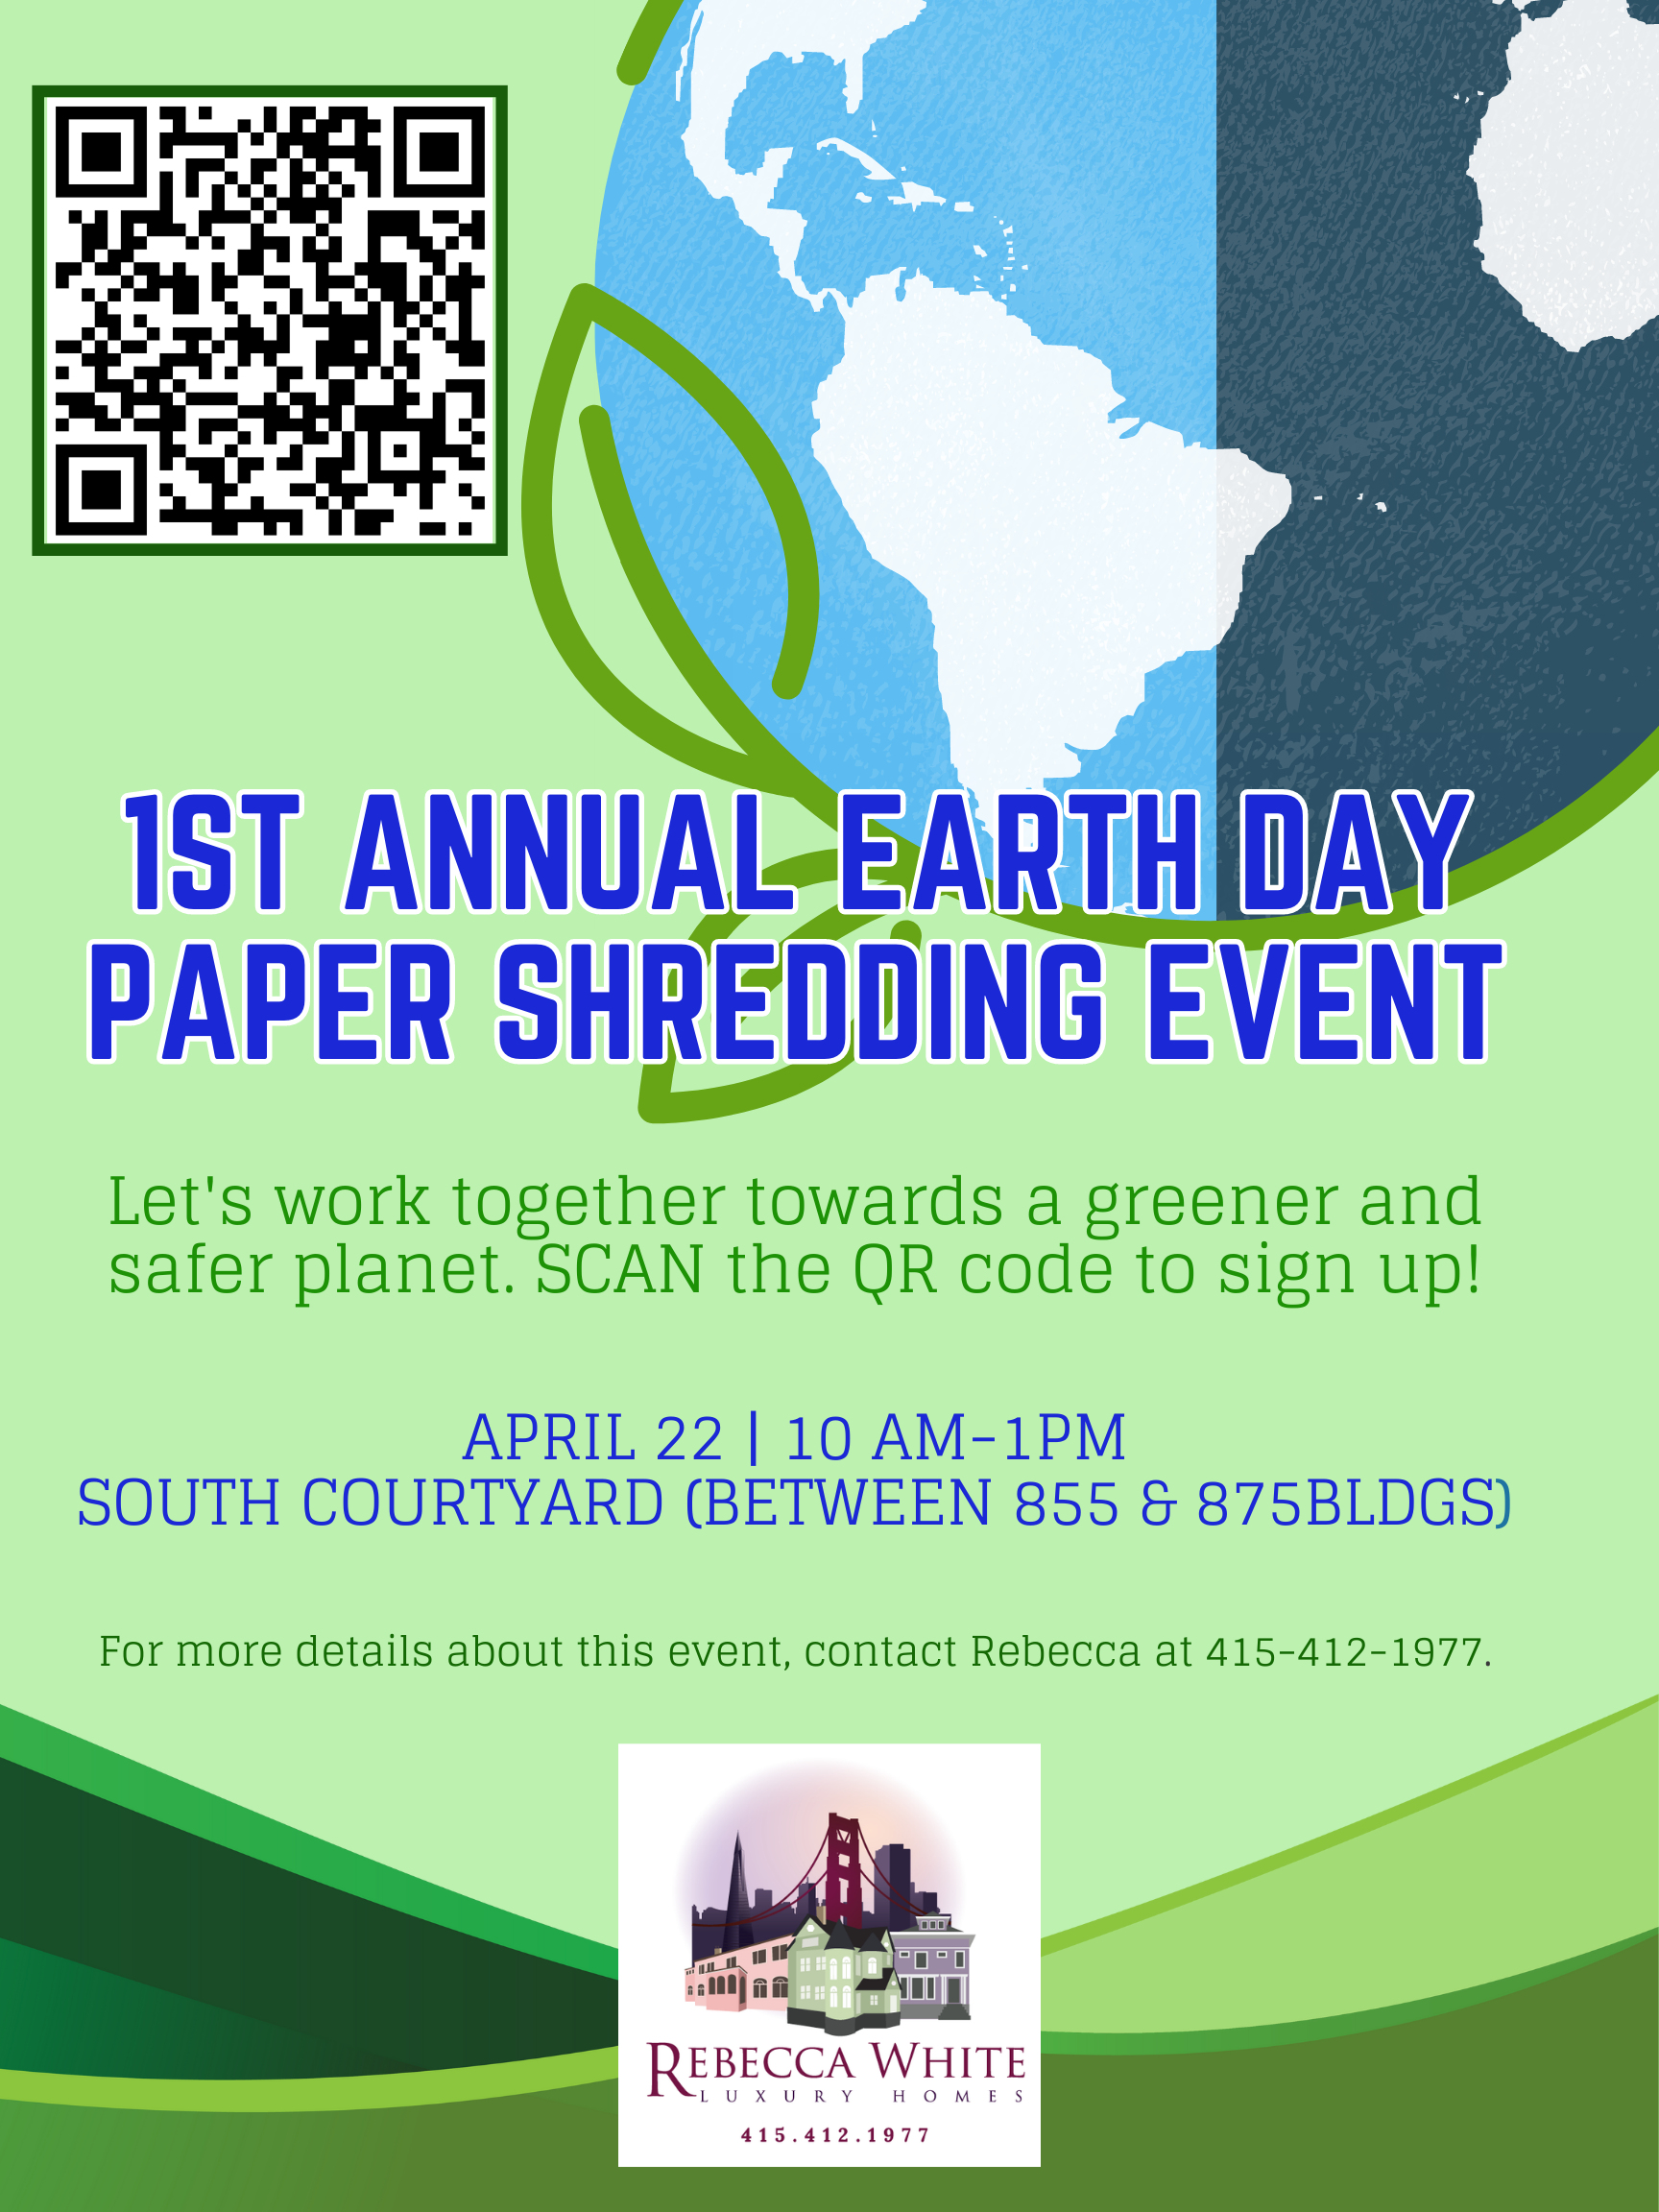 Flyer with QR code to sign up for paper shredding event in the Outer Richmond